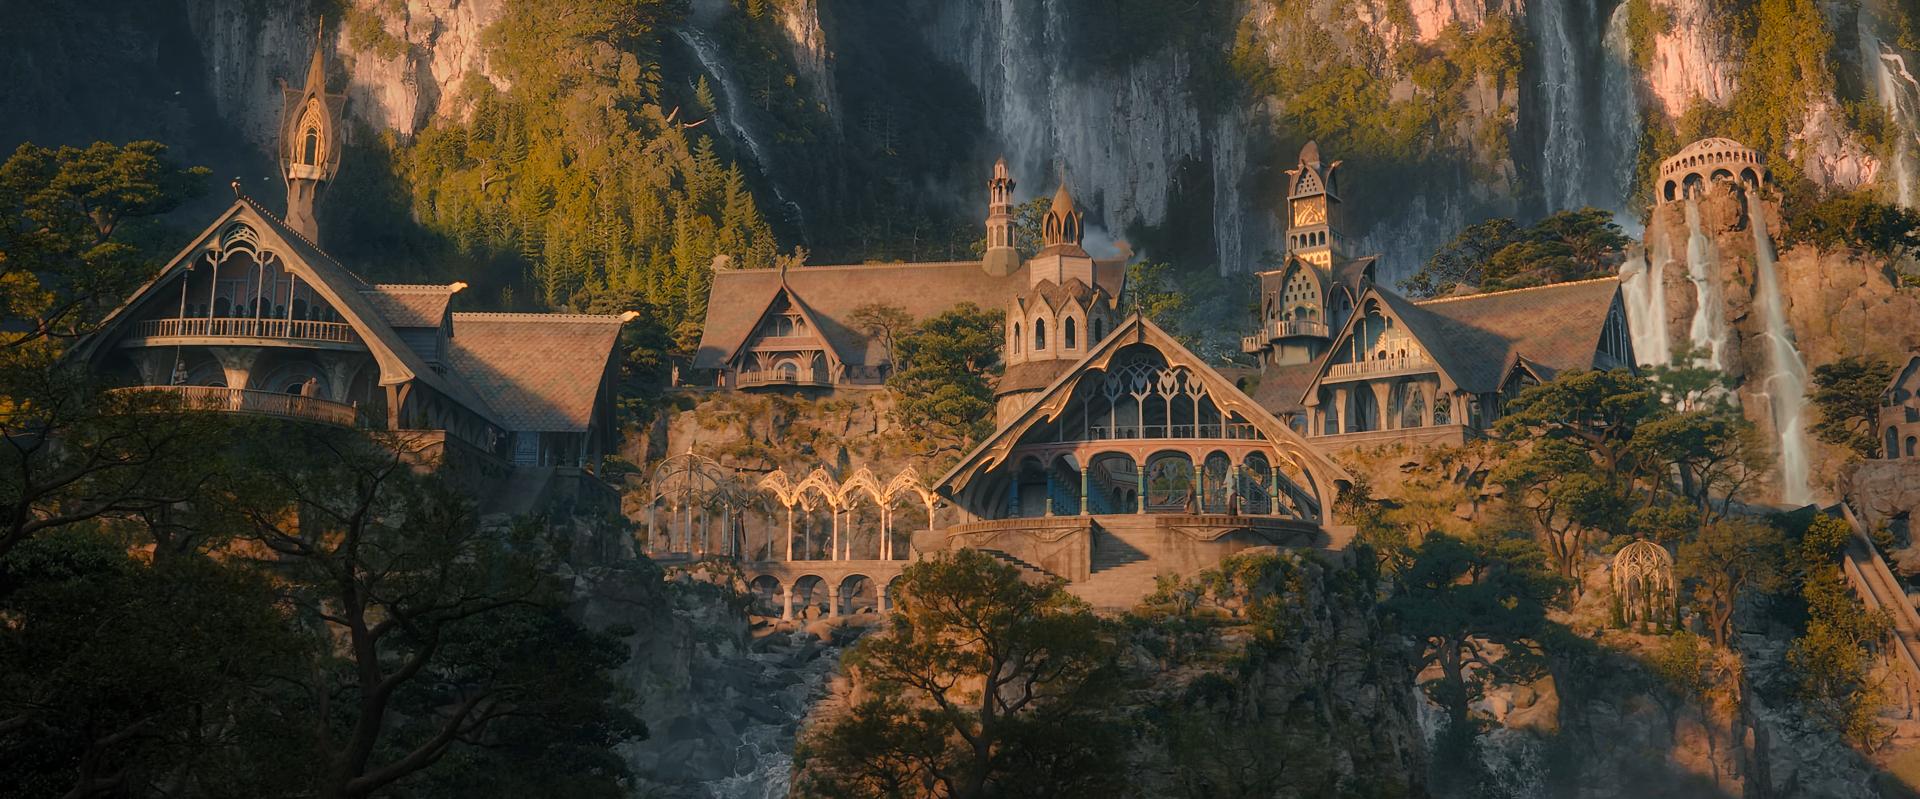 Rivendell_-_The_Hobbit.PNG